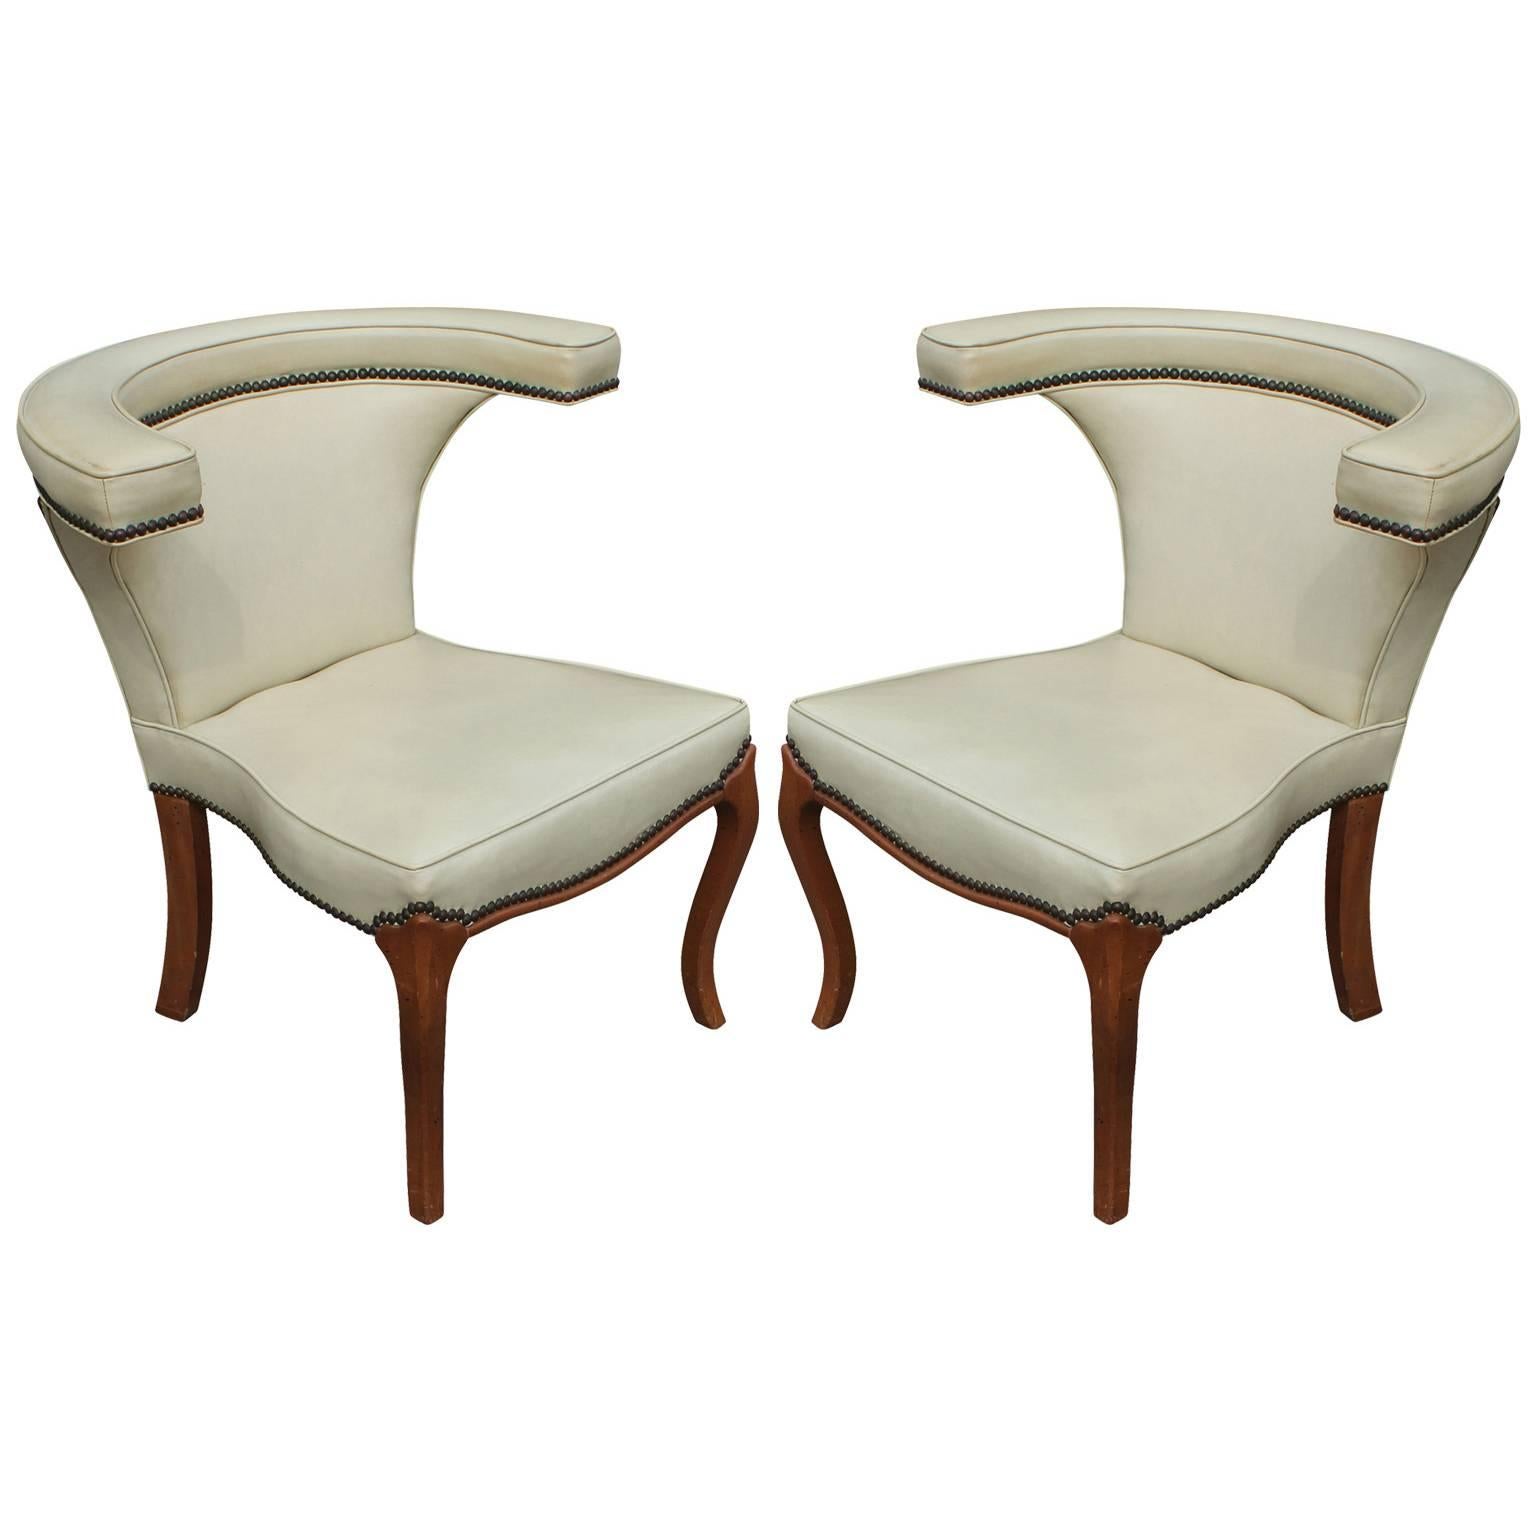 Great Pair of Vintage Cream Leather Cock Fighting Chairs